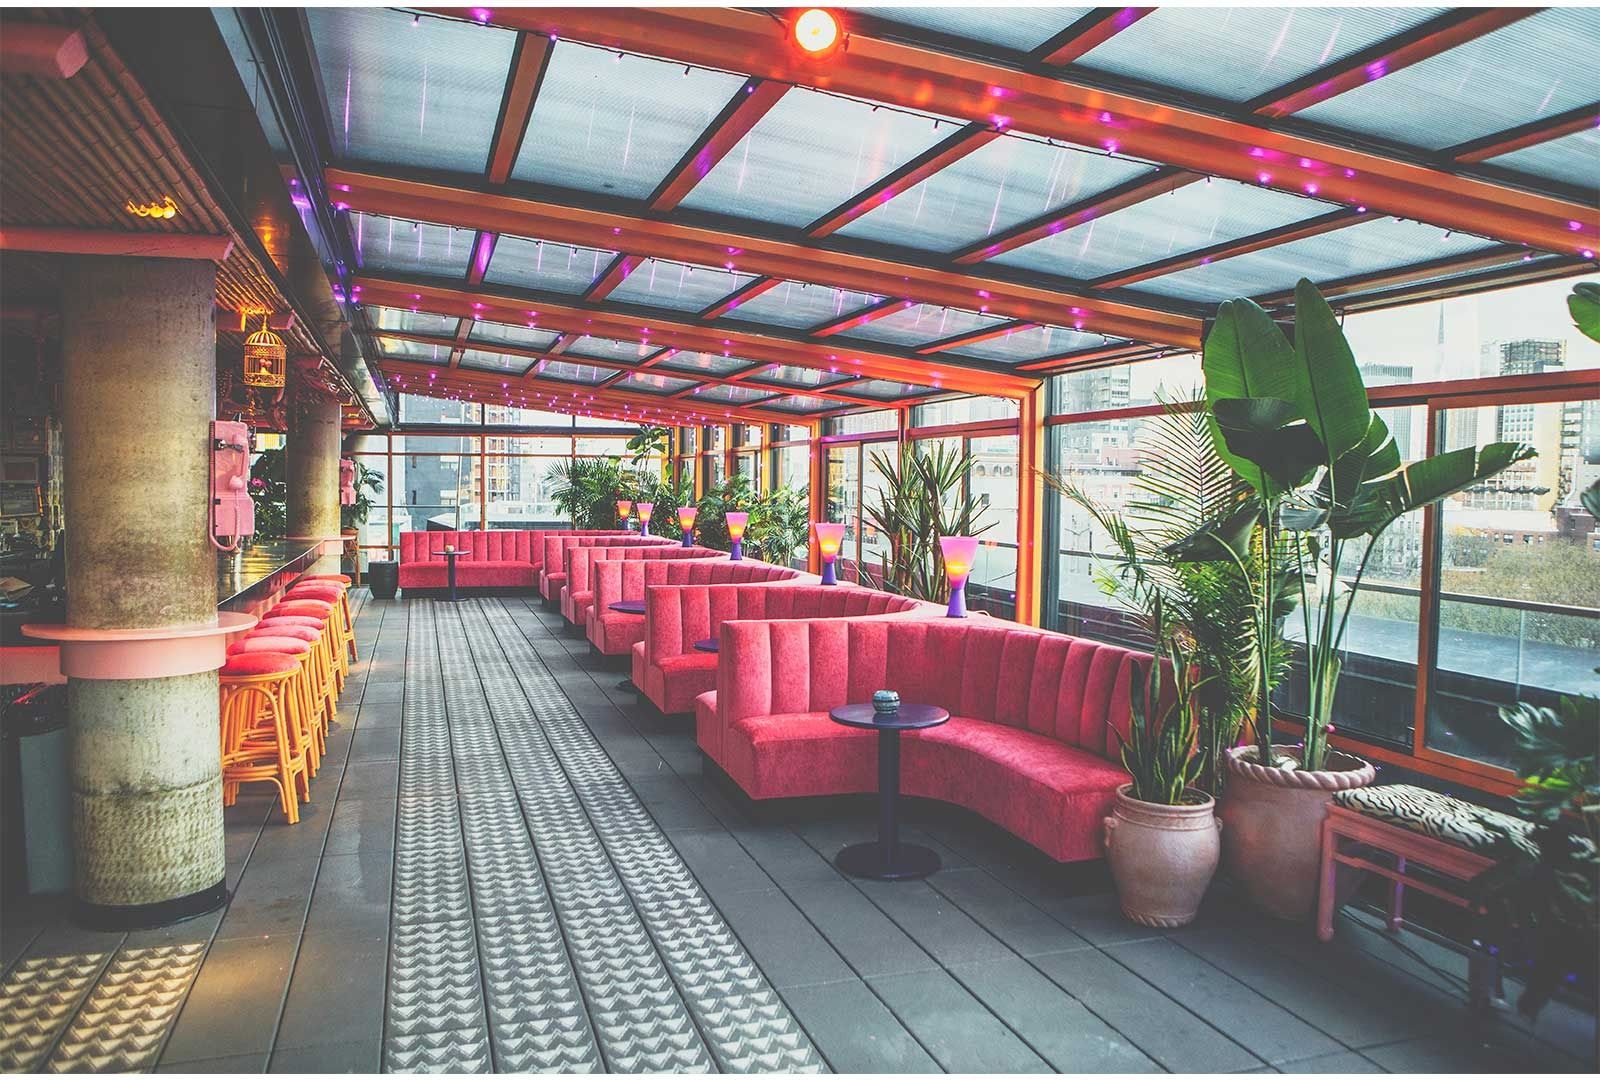 Hire Rooftop bars in East Village, New York City venues